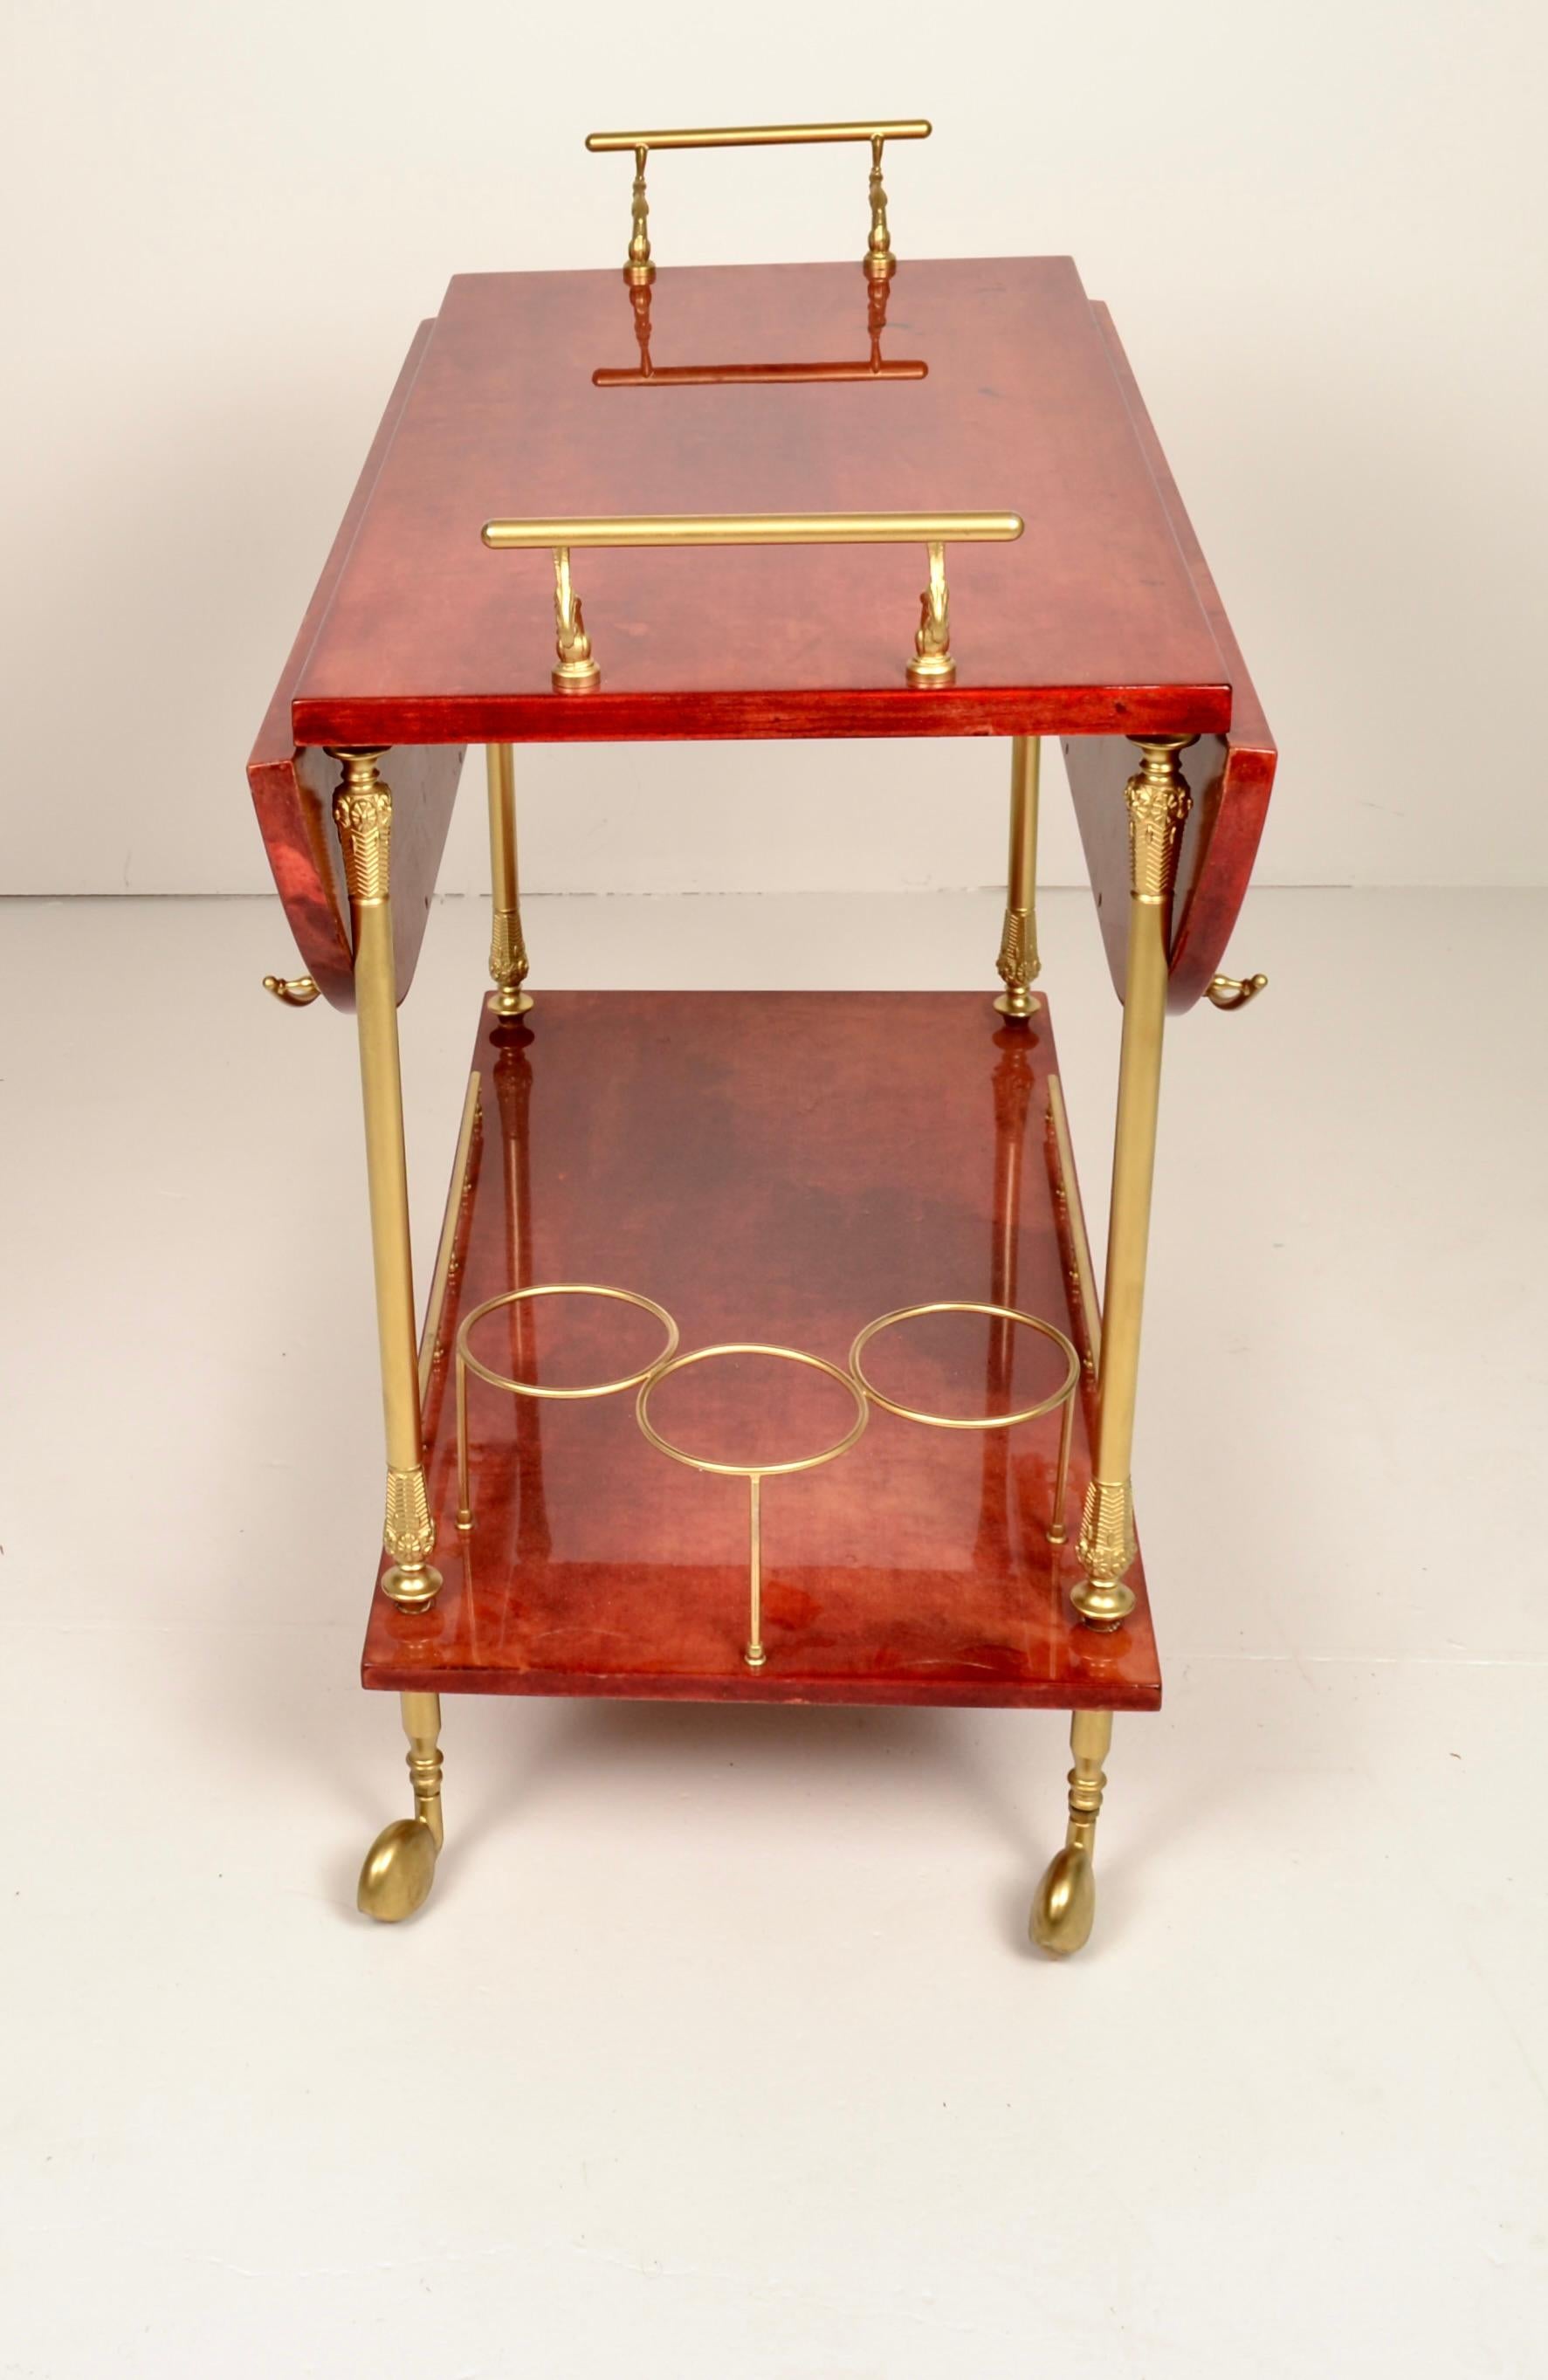 Aldo Tura Lacquered Goat Skin Bar Cart, Italy 1950s In Good Condition For Sale In Norwalk, CT